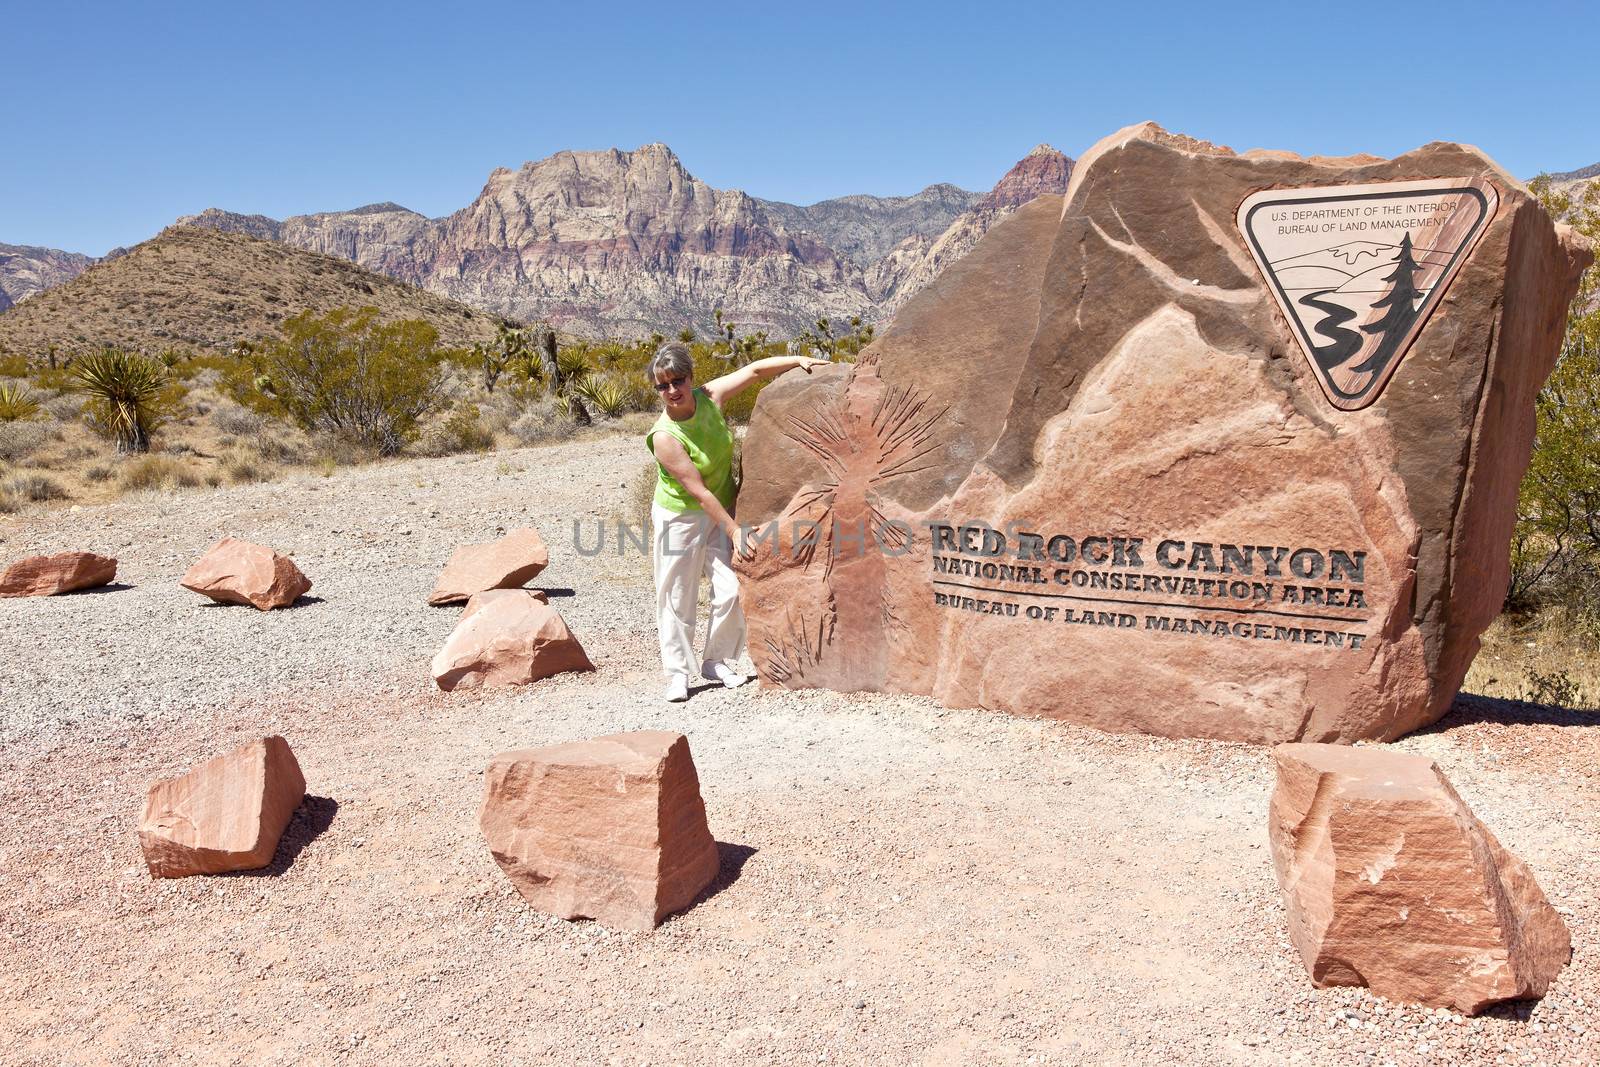 LAS VEGAS - May 31 2013: visiting the Red Rock Canyon on May 31, 2013 in Las Vegas Nevada.